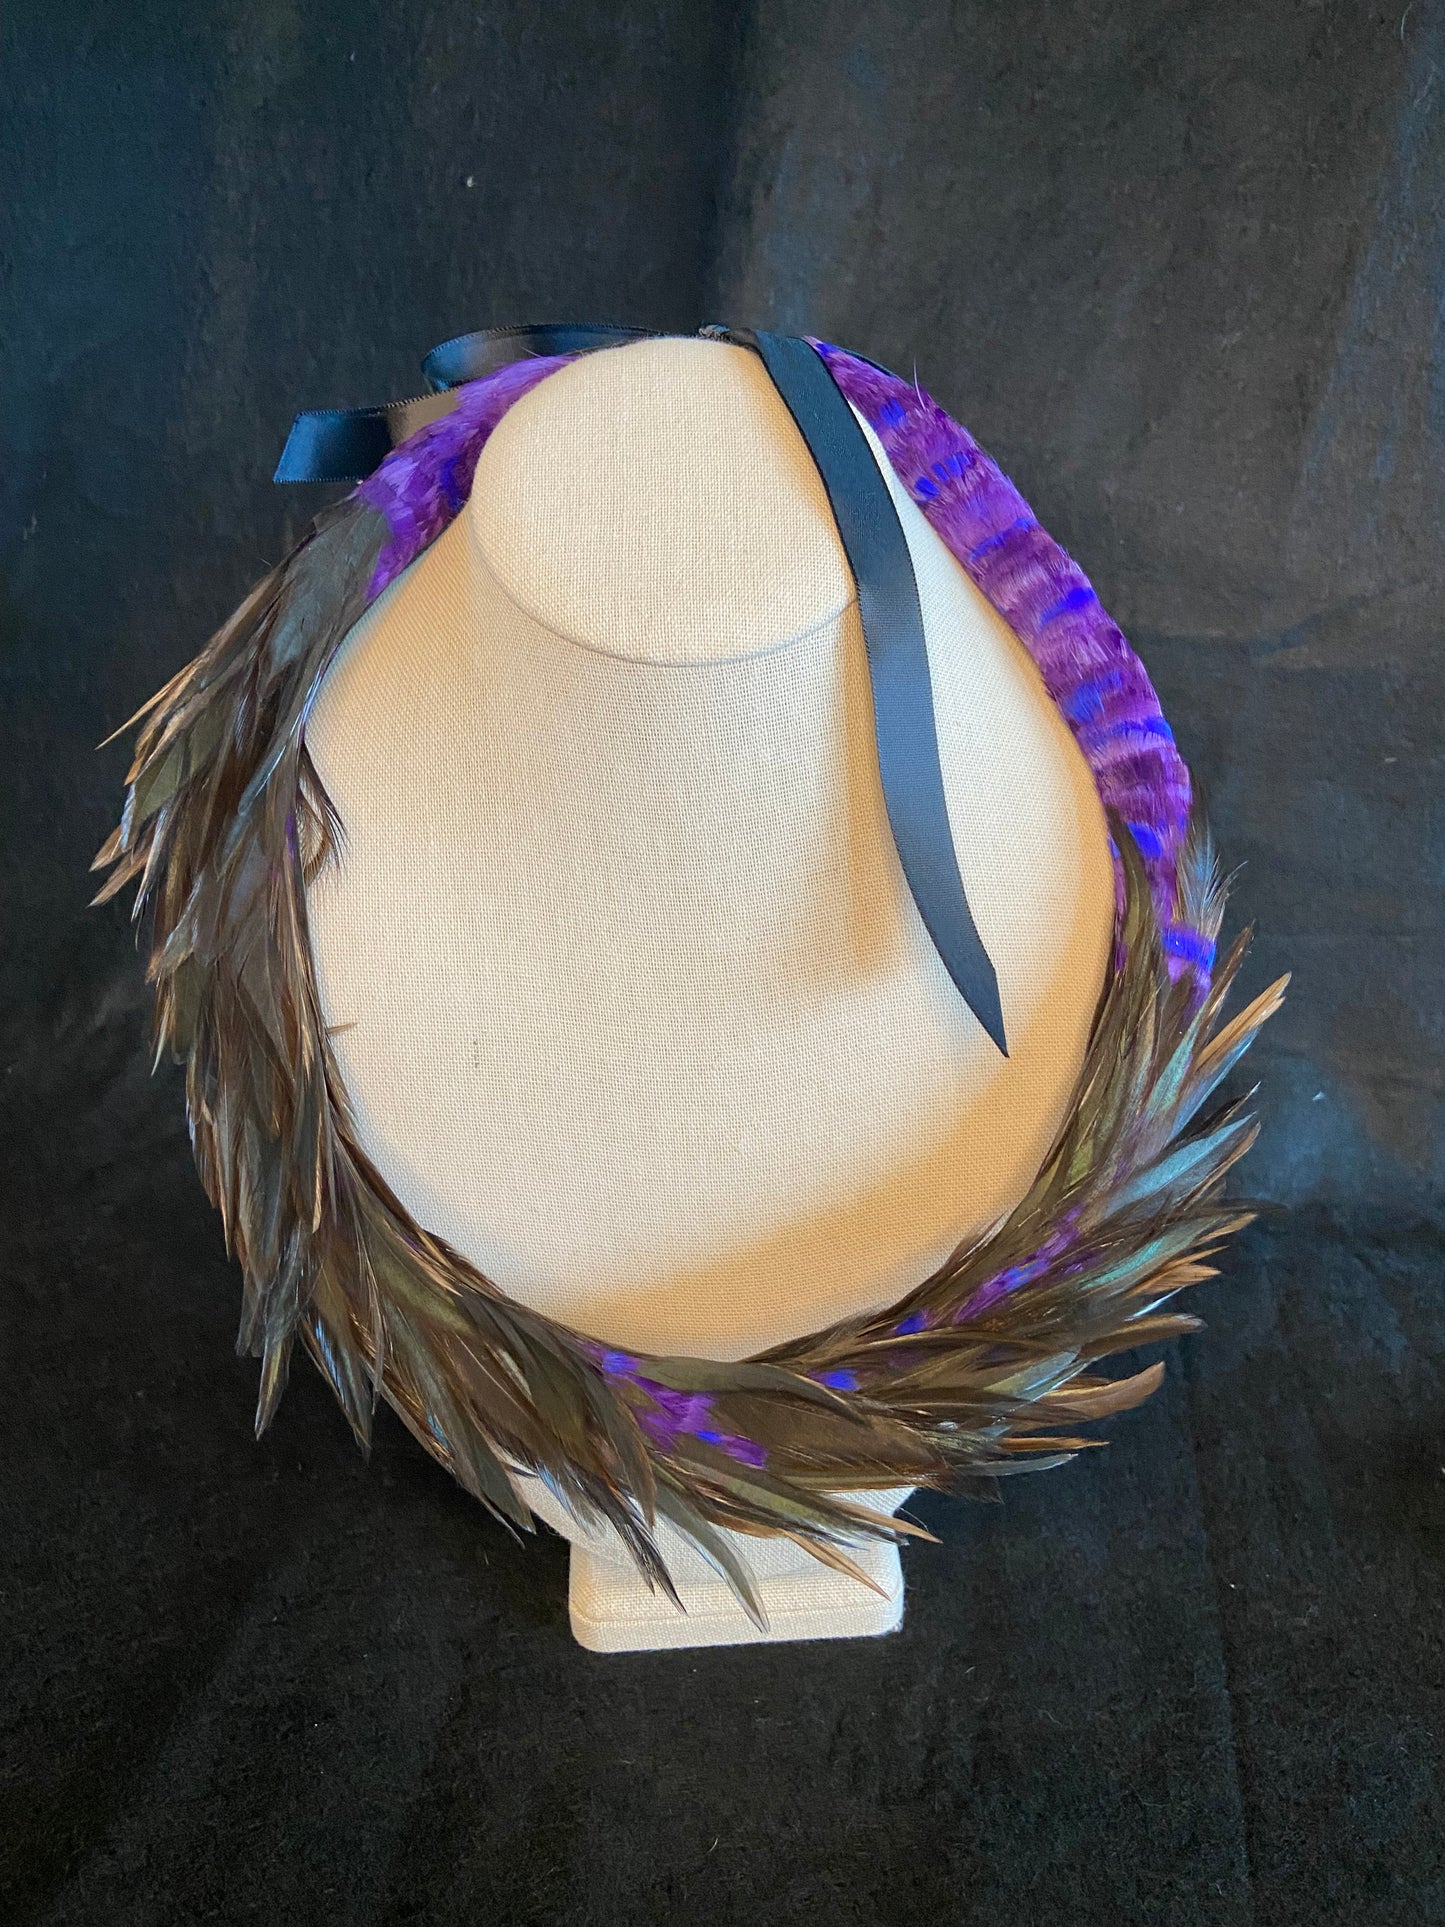 Asymmetric purple/blue lei kamoe with black rooster accents